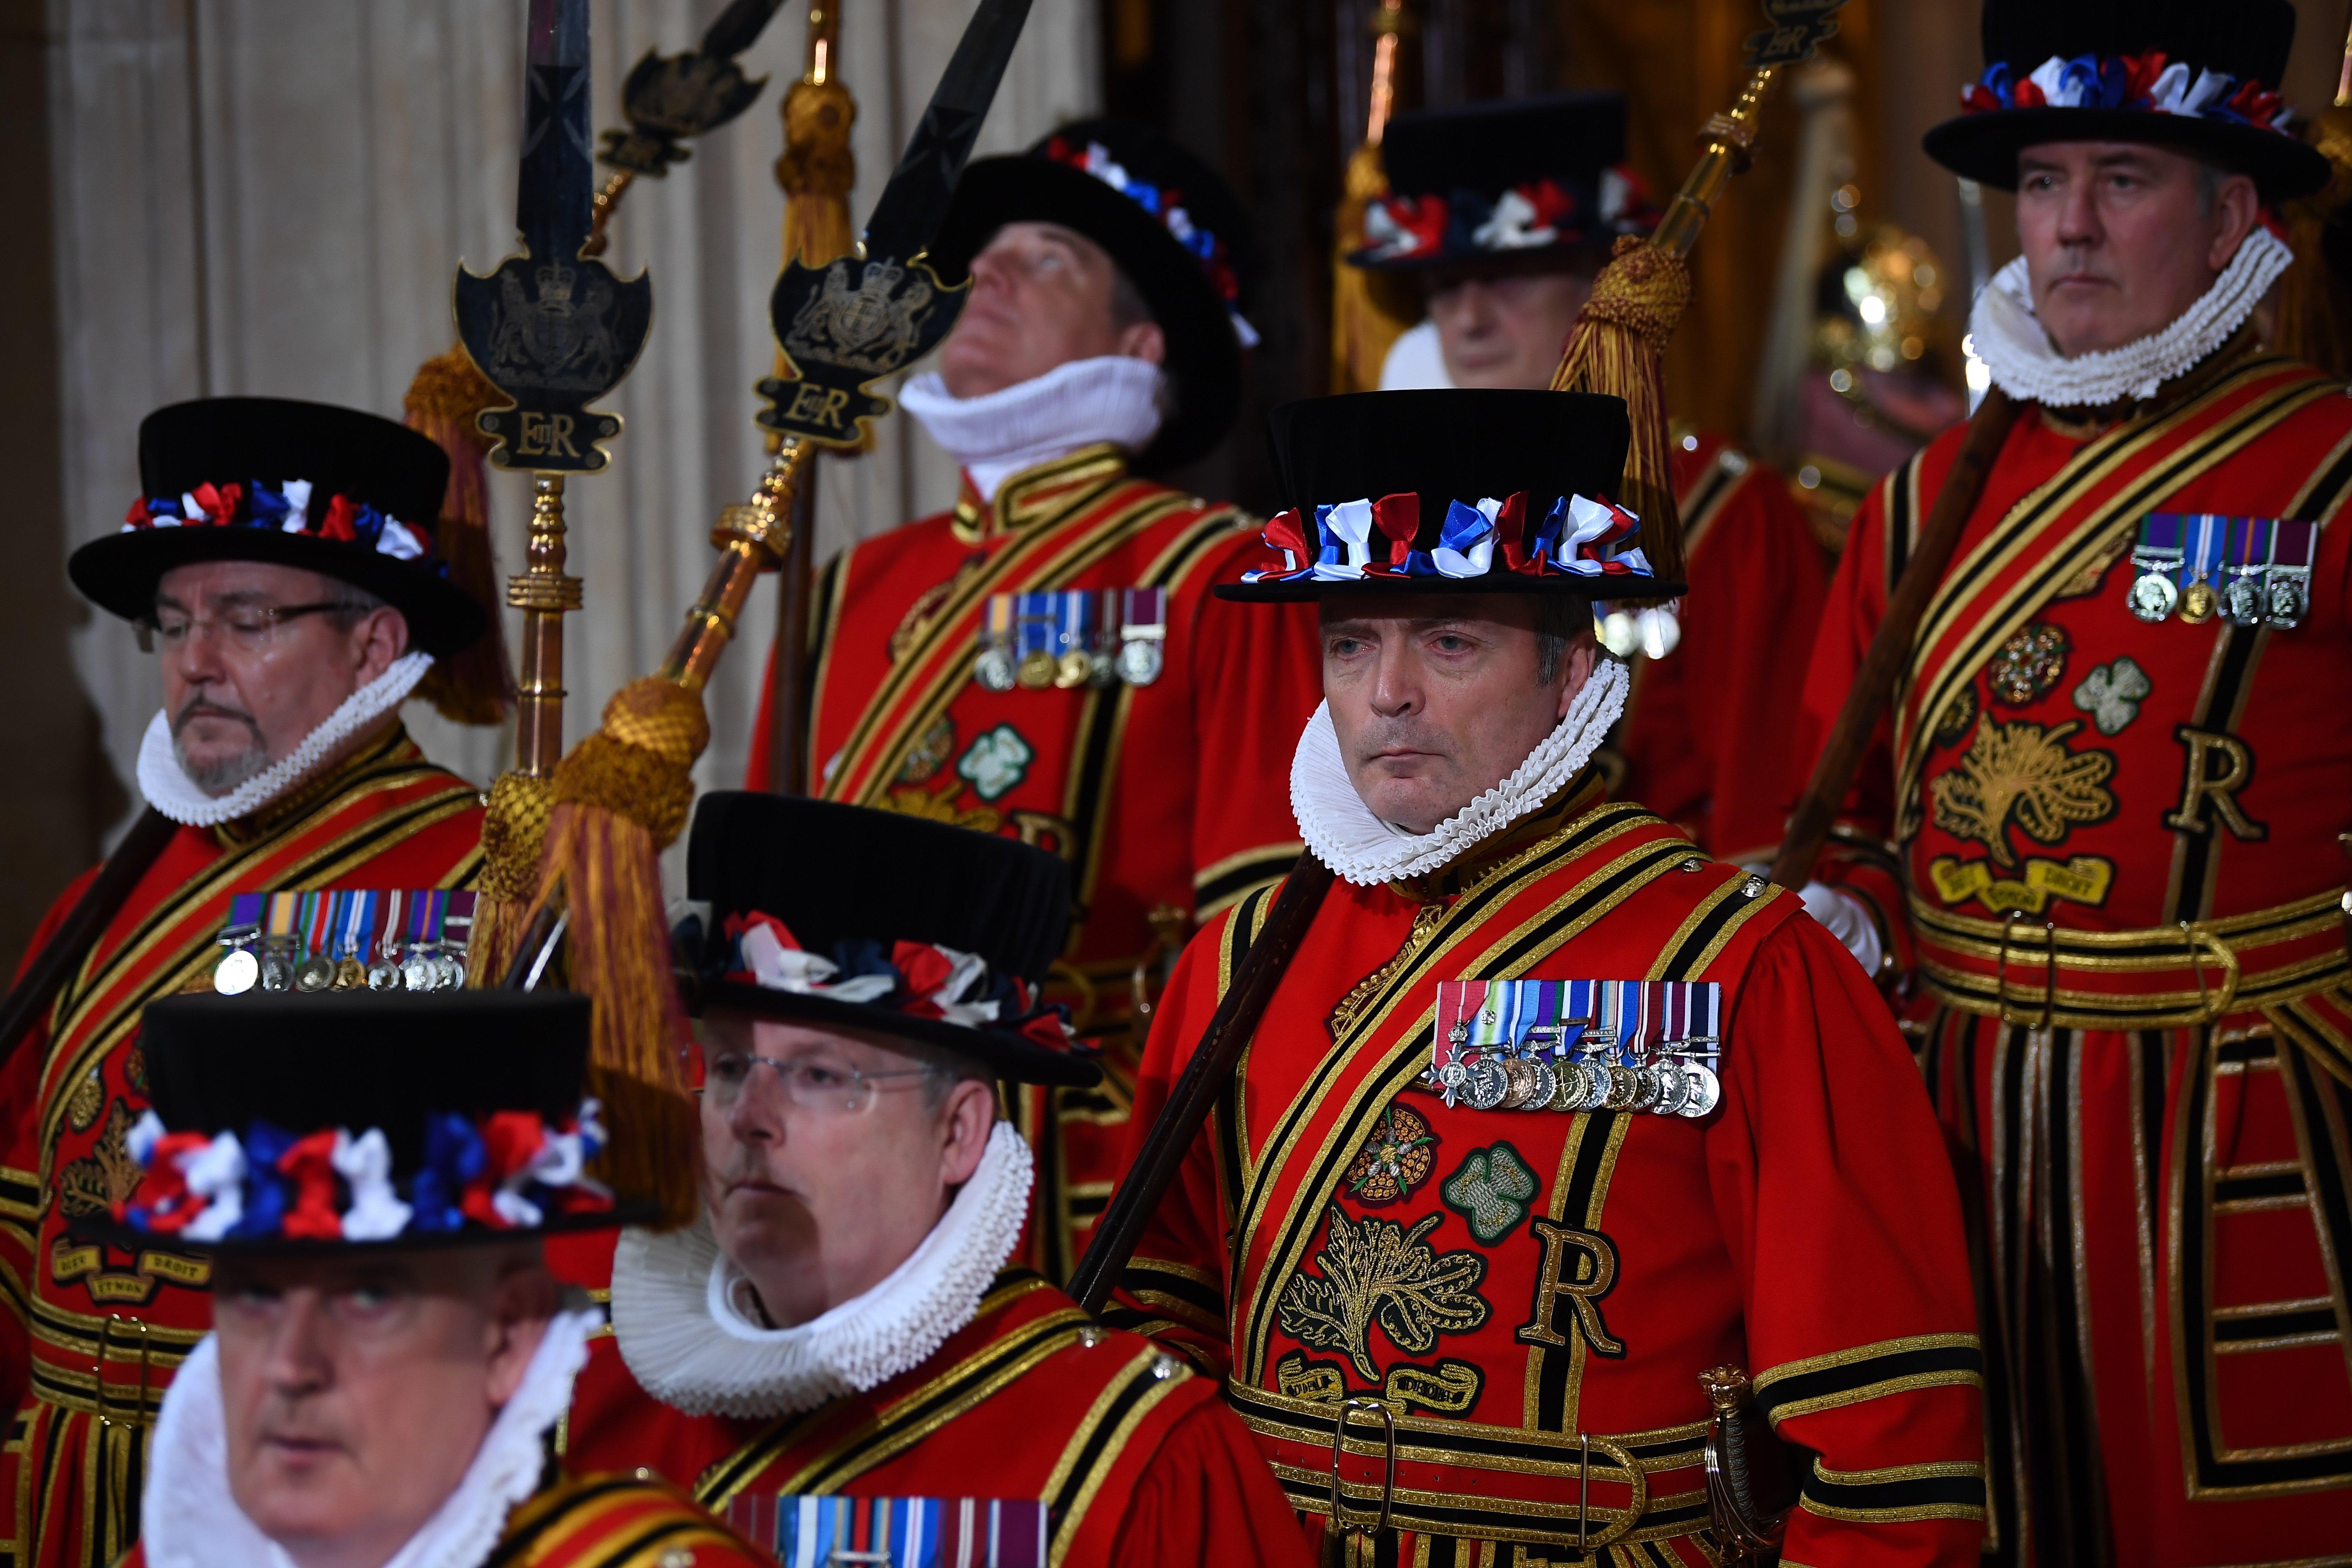 Yeoman Warders in the Sovereign's entrance ahead of the State Opening of Parliament by Queen Elizabeth II, in the House of Lords at the Palace of Westminster in London